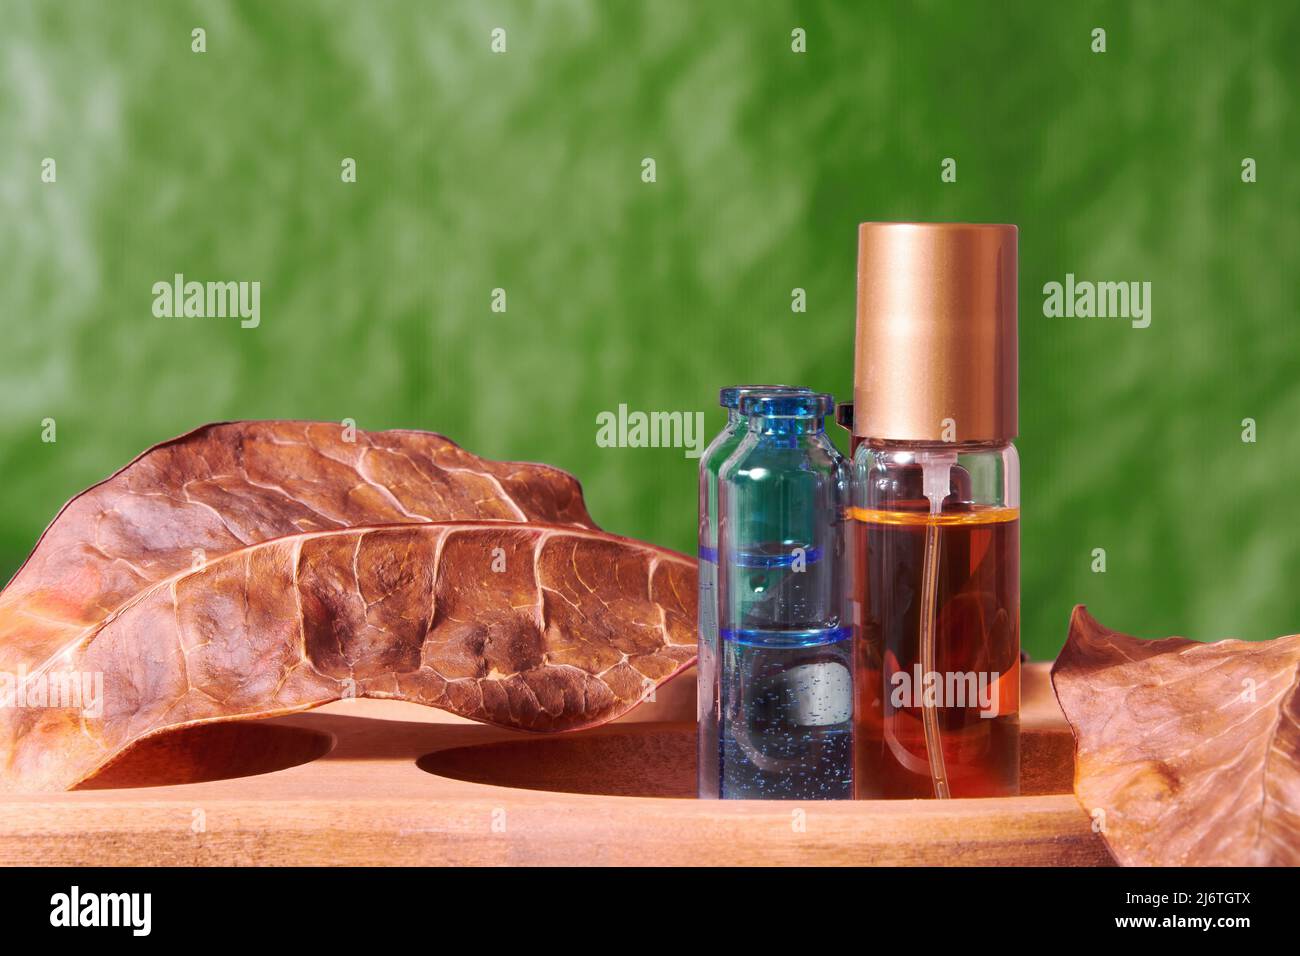 Vivid makeup display with lush perfume vial and jars with tonic. Cosmetics and body care backgrounds Stock Photo